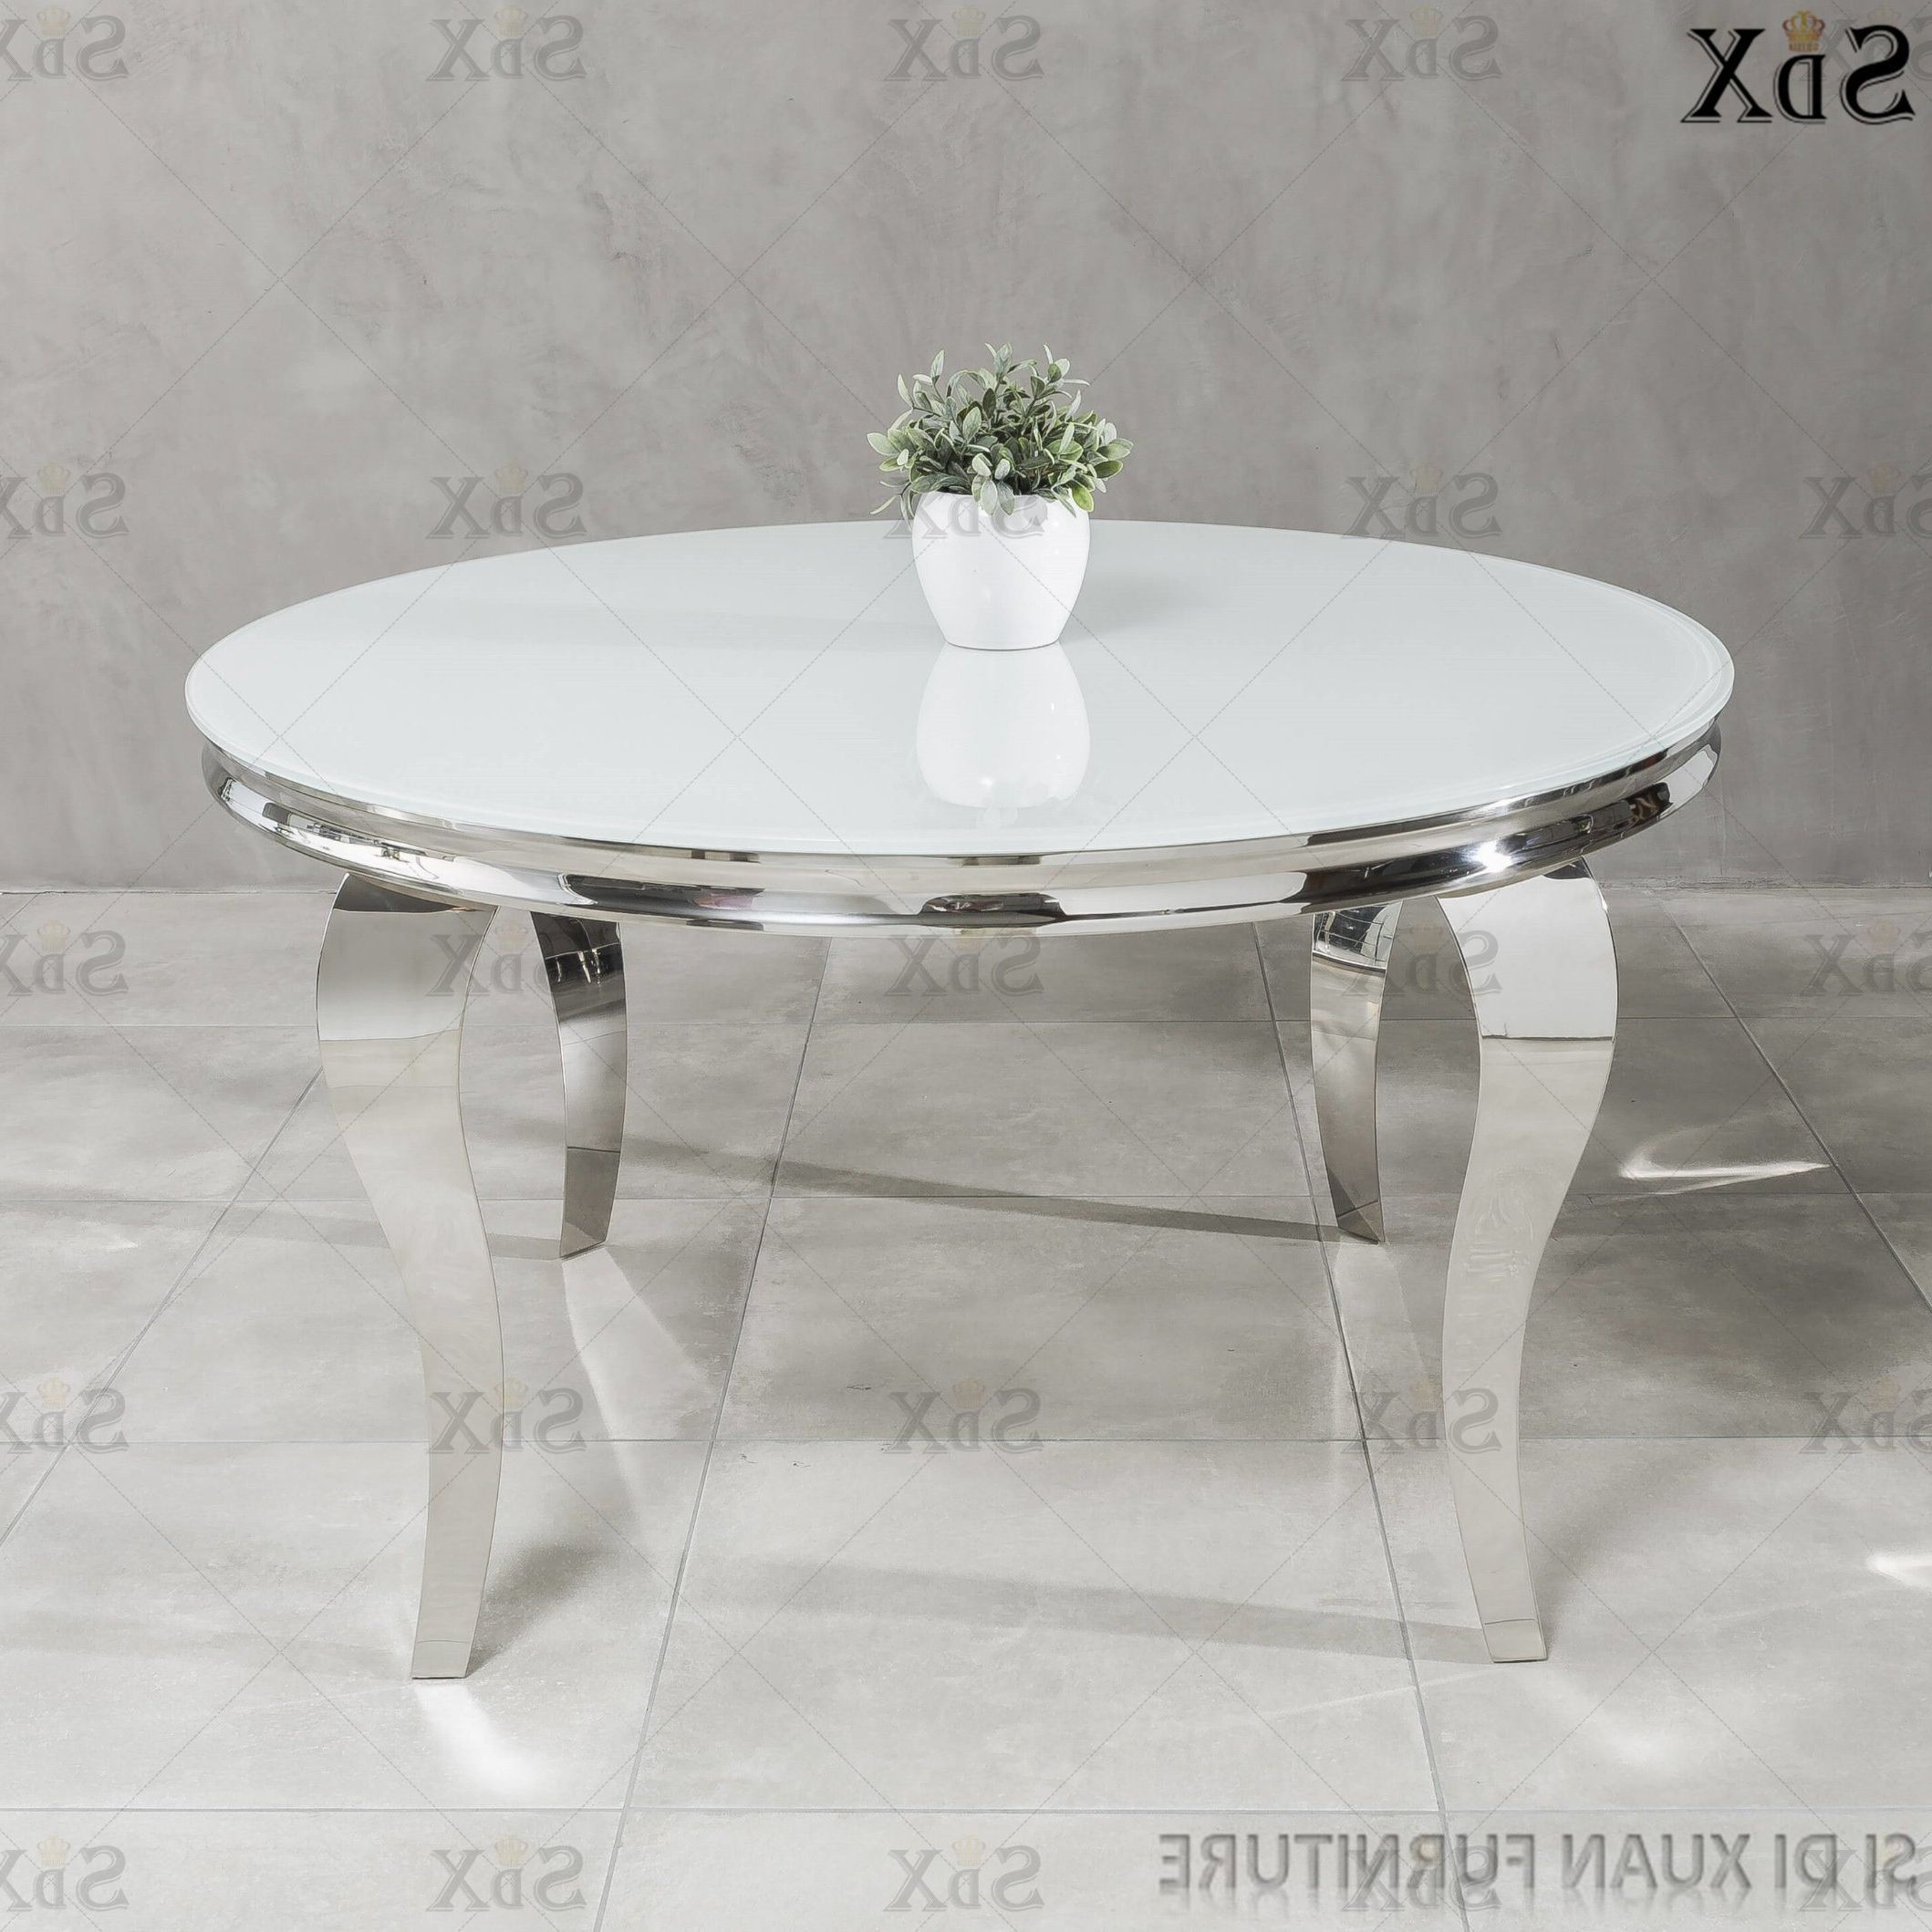 [%[hot Item] Modern Round Table Dining Room Furniture Set Glass Top Stainless  Steel Furniture Dining Table Pertaining To Preferred Modern Round Glass Top Dining Tables|modern Round Glass Top Dining Tables Pertaining To Newest [hot Item] Modern Round Table Dining Room Furniture Set Glass Top Stainless  Steel Furniture Dining Table|most Recently Released Modern Round Glass Top Dining Tables Within [hot Item] Modern Round Table Dining Room Furniture Set Glass Top Stainless  Steel Furniture Dining Table|popular [hot Item] Modern Round Table Dining Room Furniture Set Glass Top Stainless  Steel Furniture Dining Table Throughout Modern Round Glass Top Dining Tables%] (Photo 18 of 25)